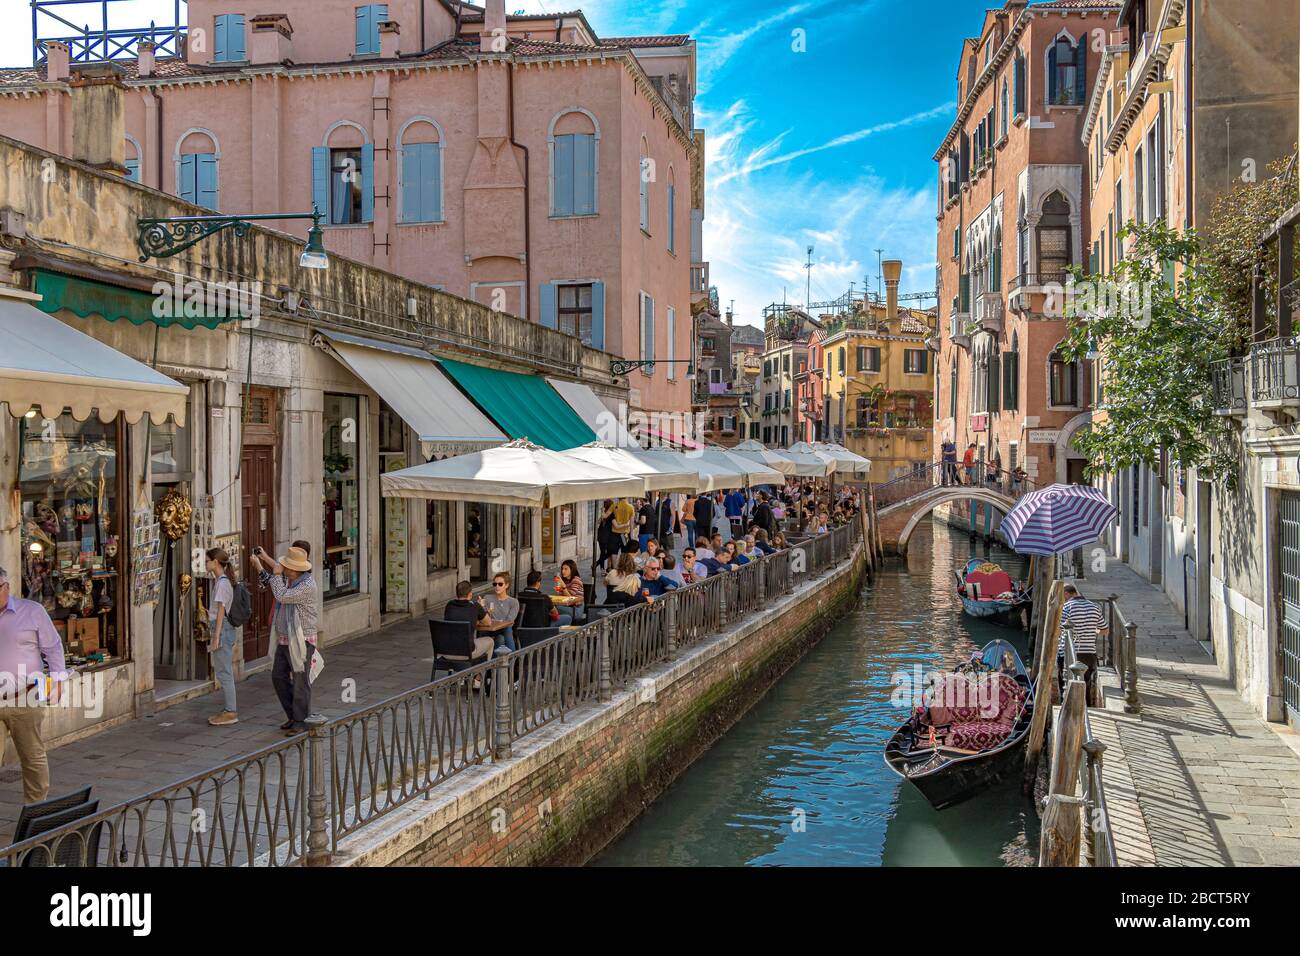 People having drinks outside a canal side restaurant on Fondamentina de l'Osmarin in the San Marco district of Venice,Italy Stock Photo